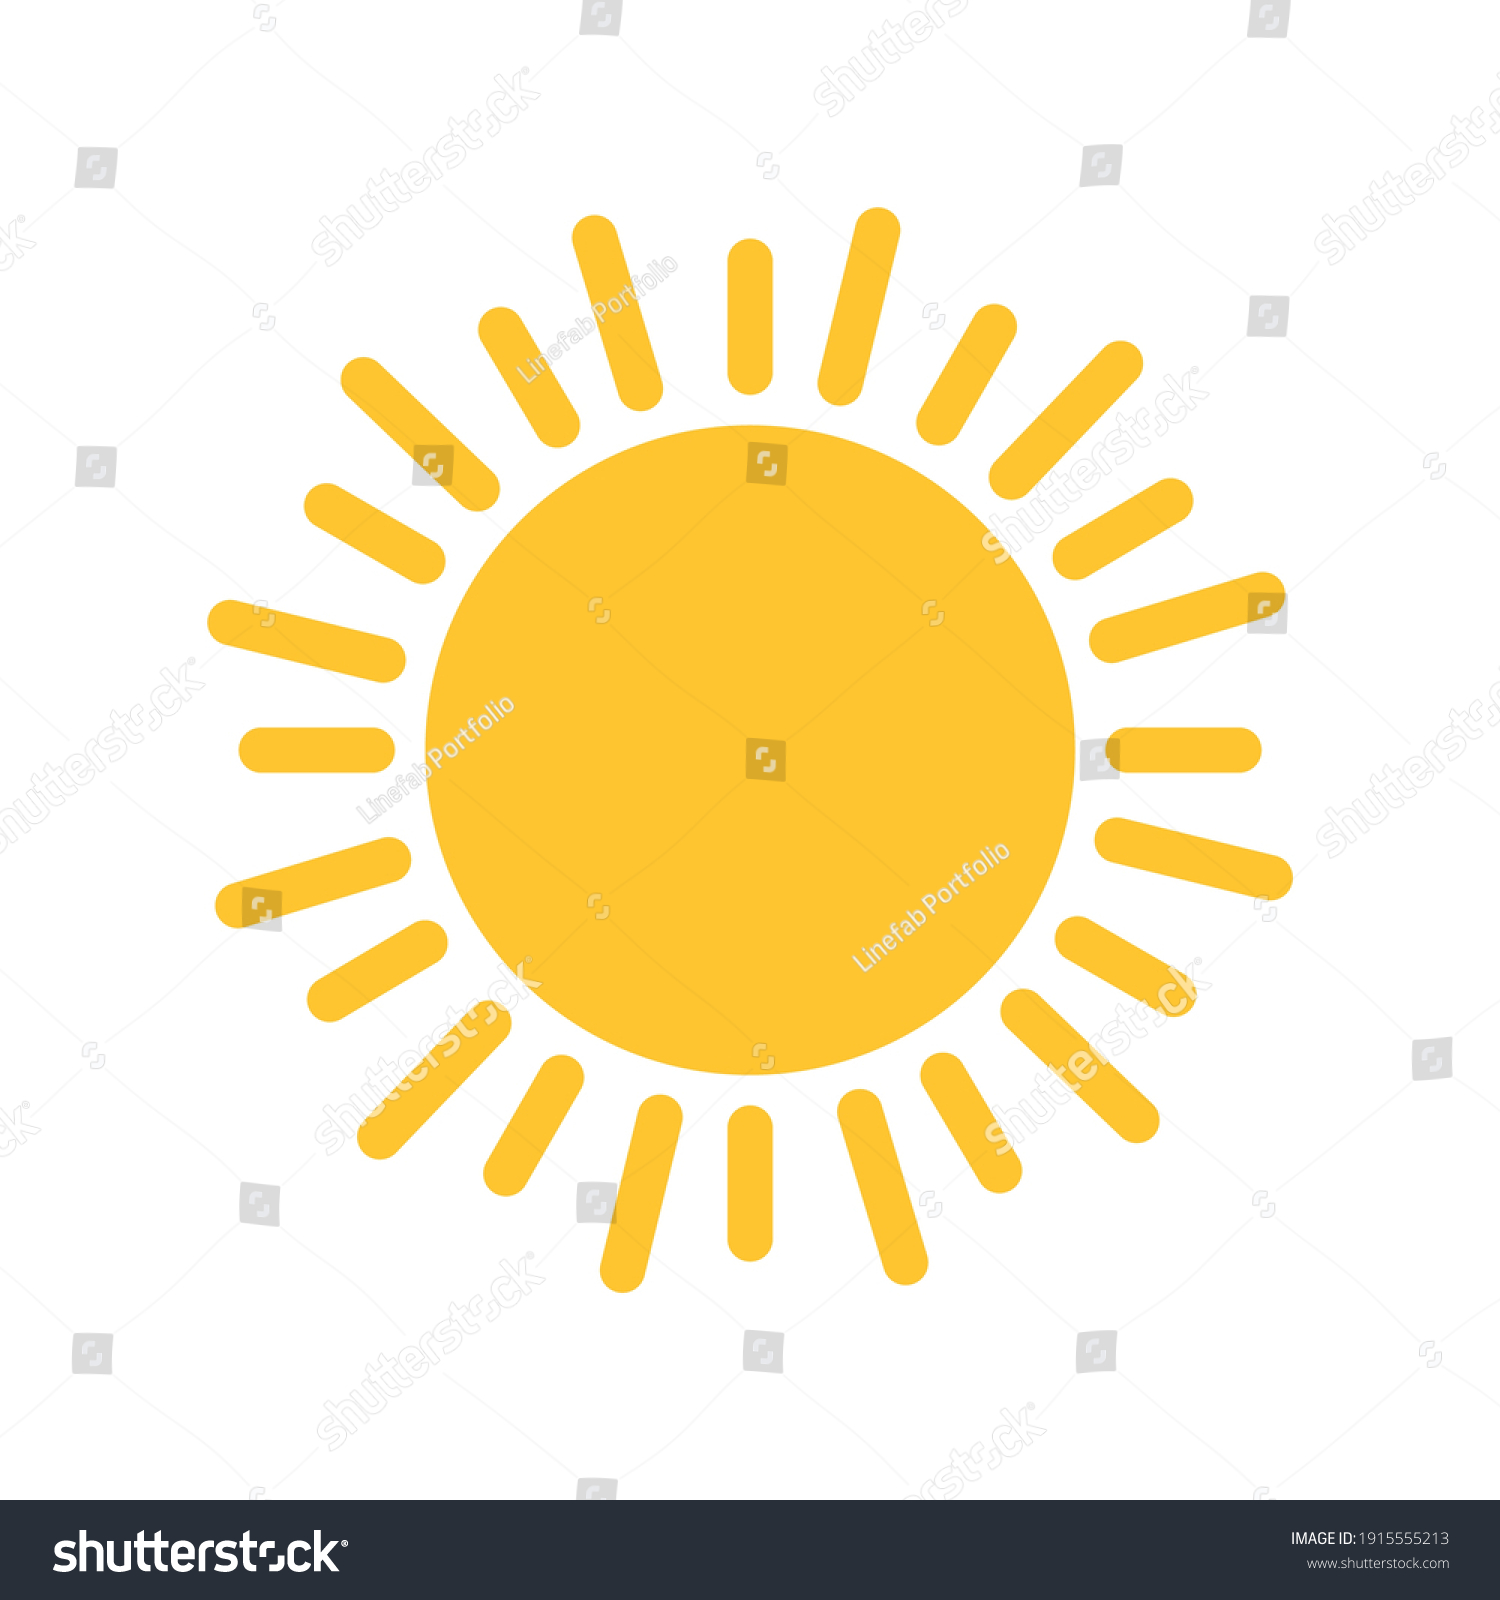 Sun icon for graphic design projects #1915555213